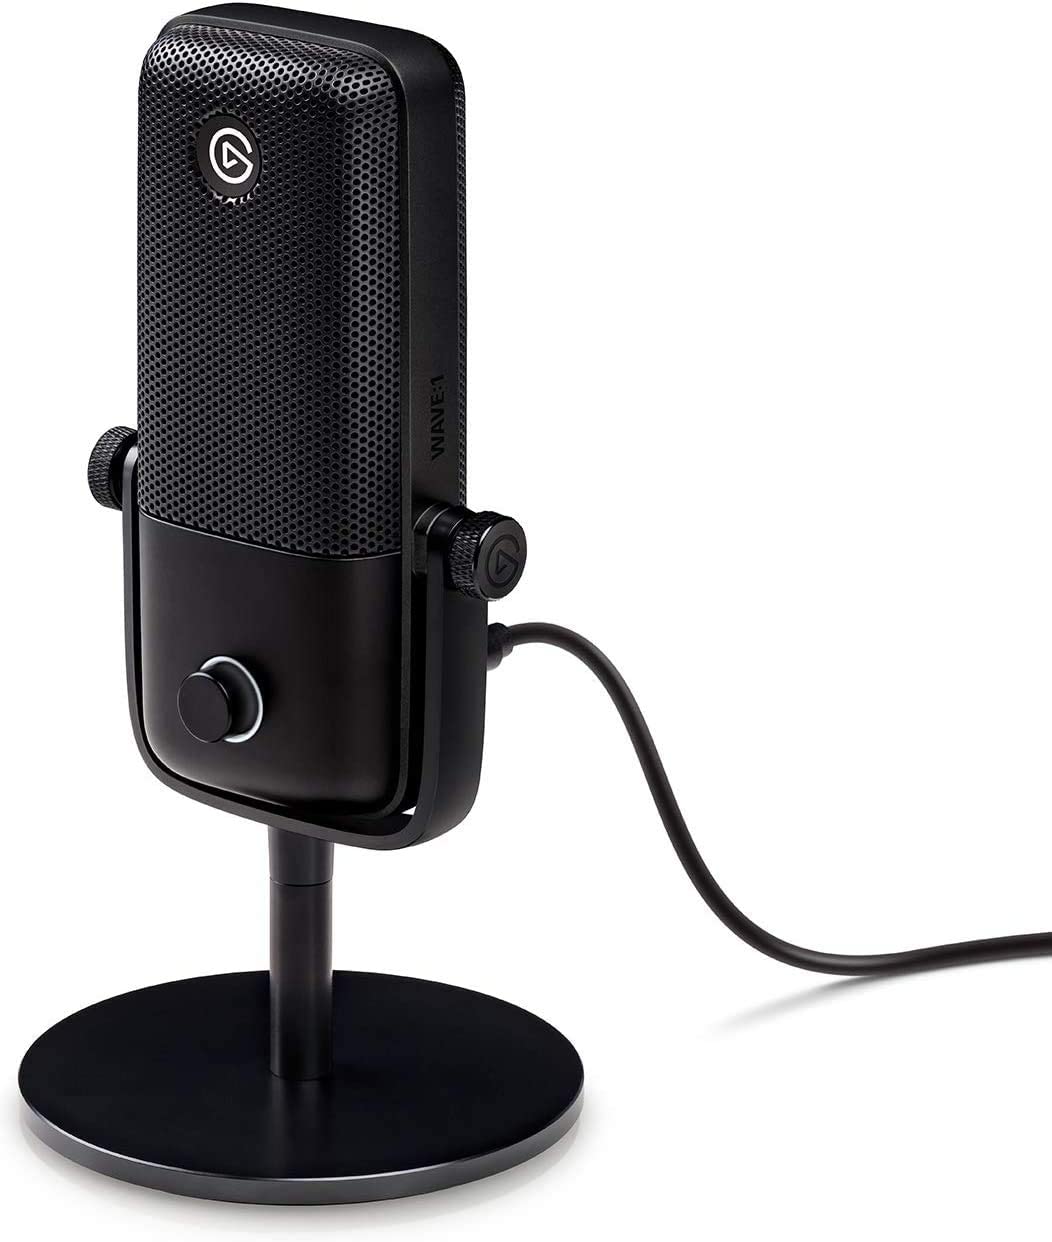 Elgato’s Wave:1 USB-C microphone at low of $110